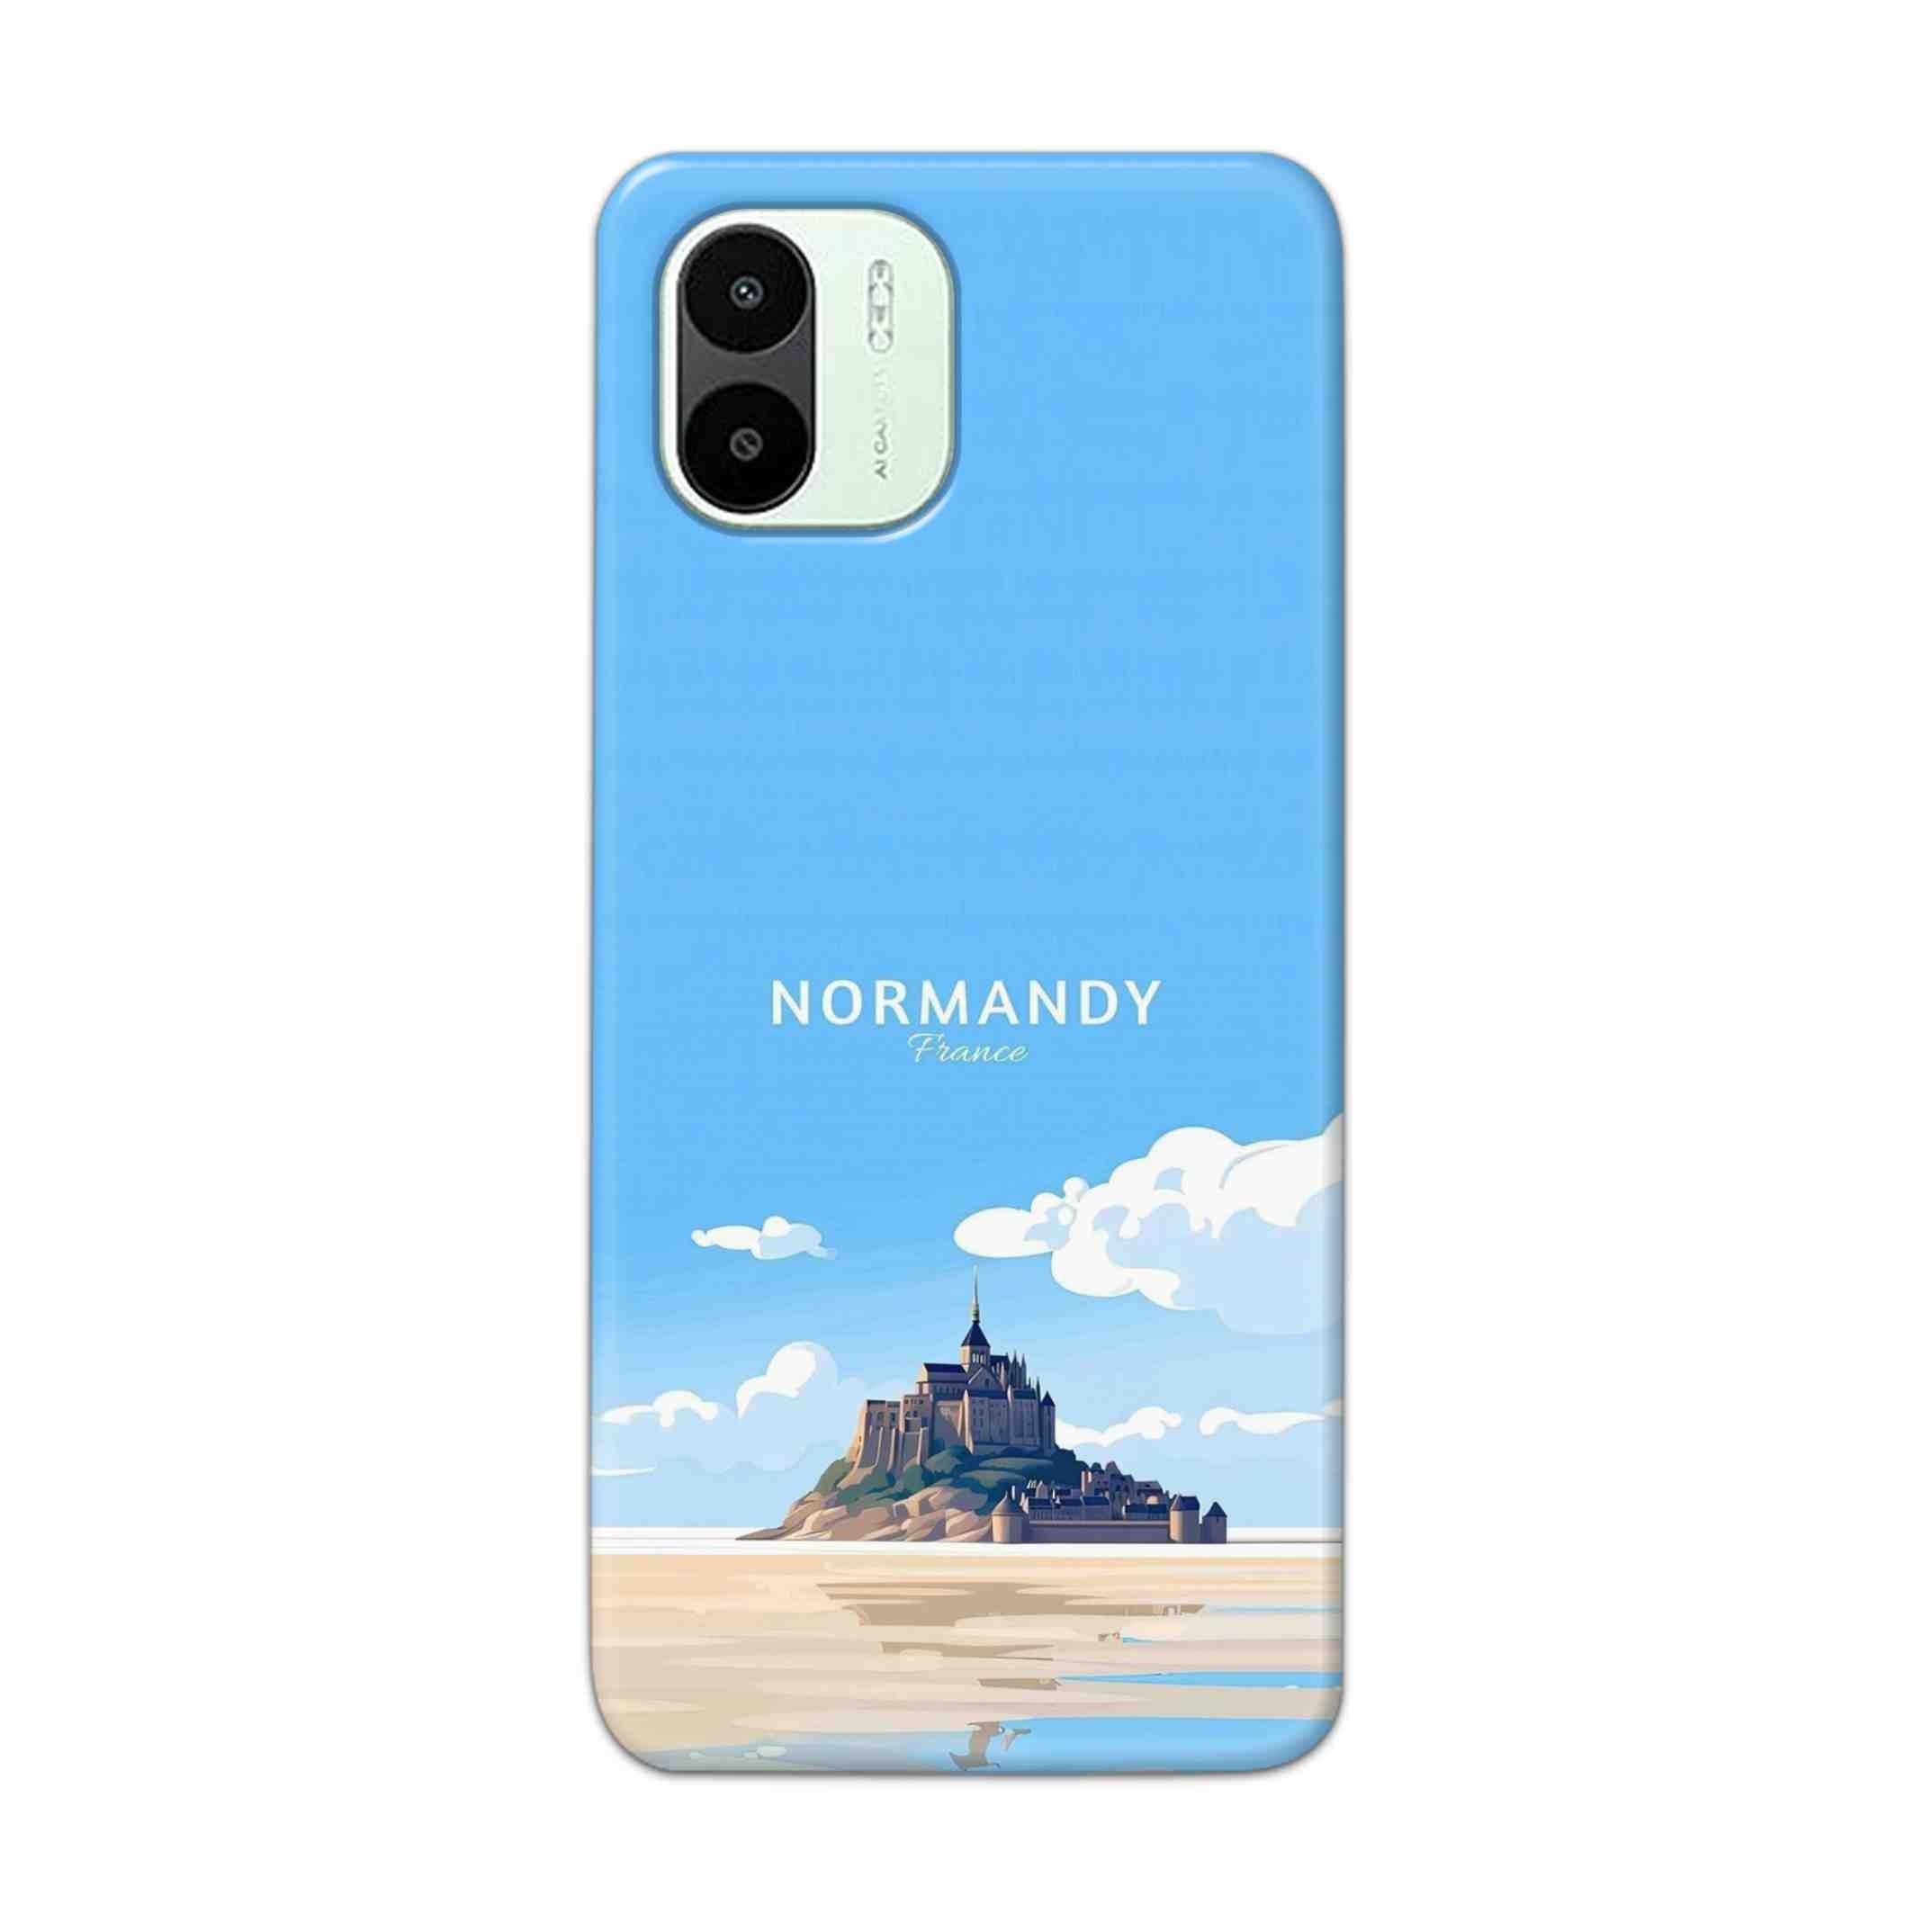 Buy Normandy Hard Back Mobile Phone Case Cover For Xiaomi Redmi A1 5G Online